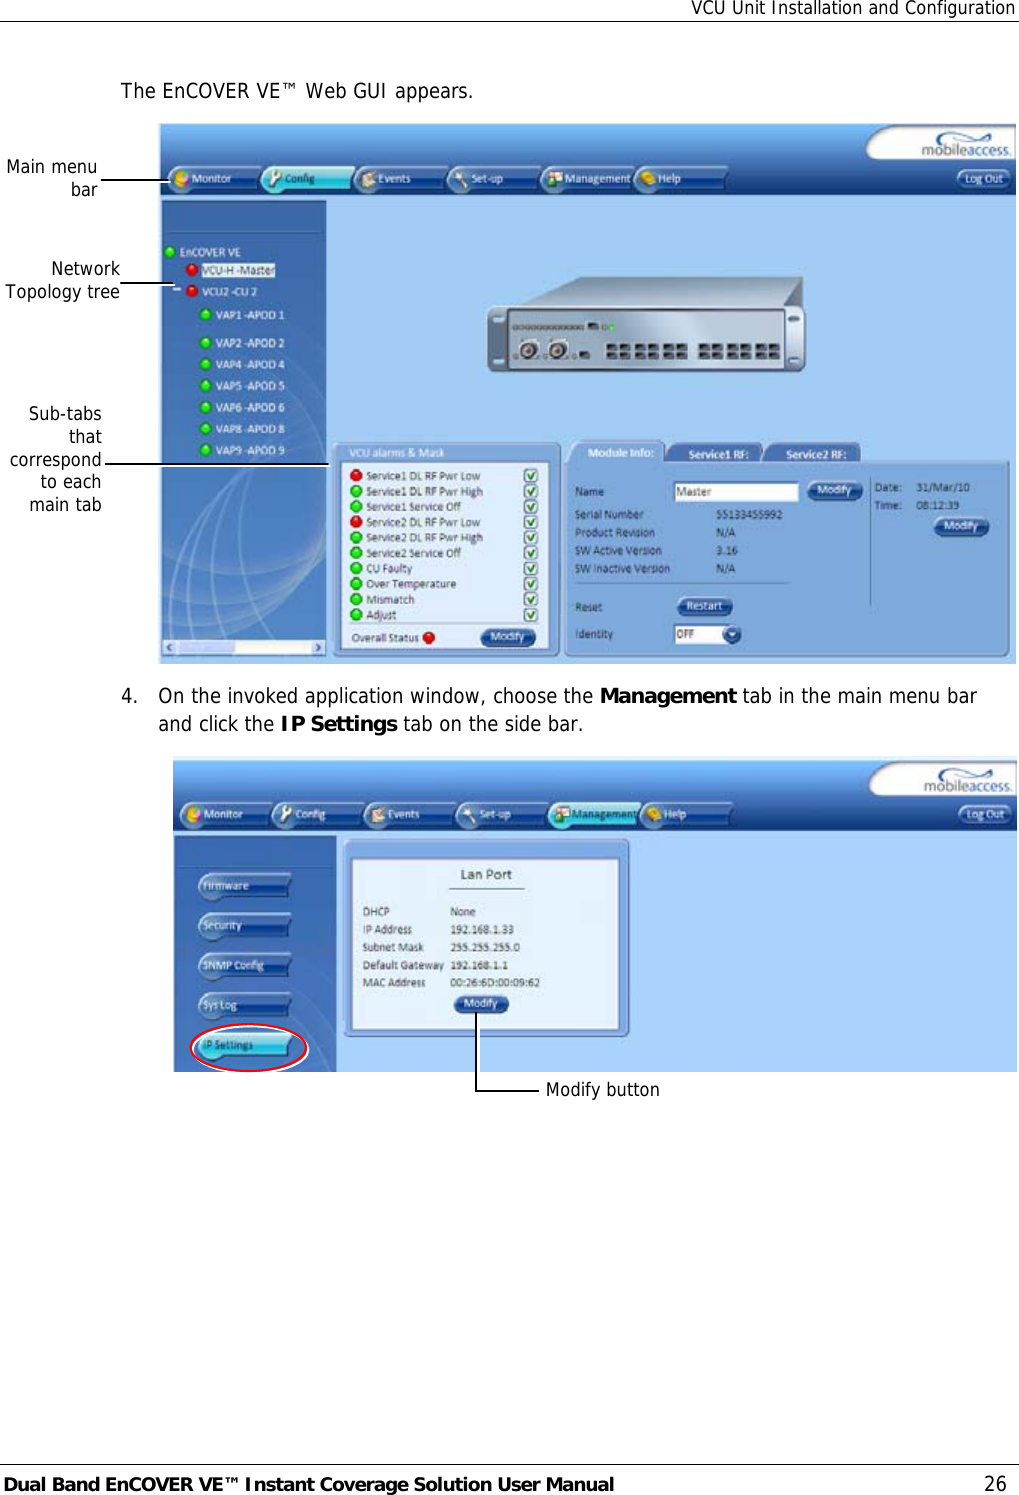 VCU Unit Installation and Configuration Dual Band EnCOVER VE™ Instant Coverage Solution User Manual  26 The EnCOVER VE™ Web GUI appears.  4.  On the invoked application window, choose the Management tab in the main menu bar and click the IP Settings tab on the side bar.  NetworkTopology treeSub-tabs that correspond to each main tab Main menu bar Modify button